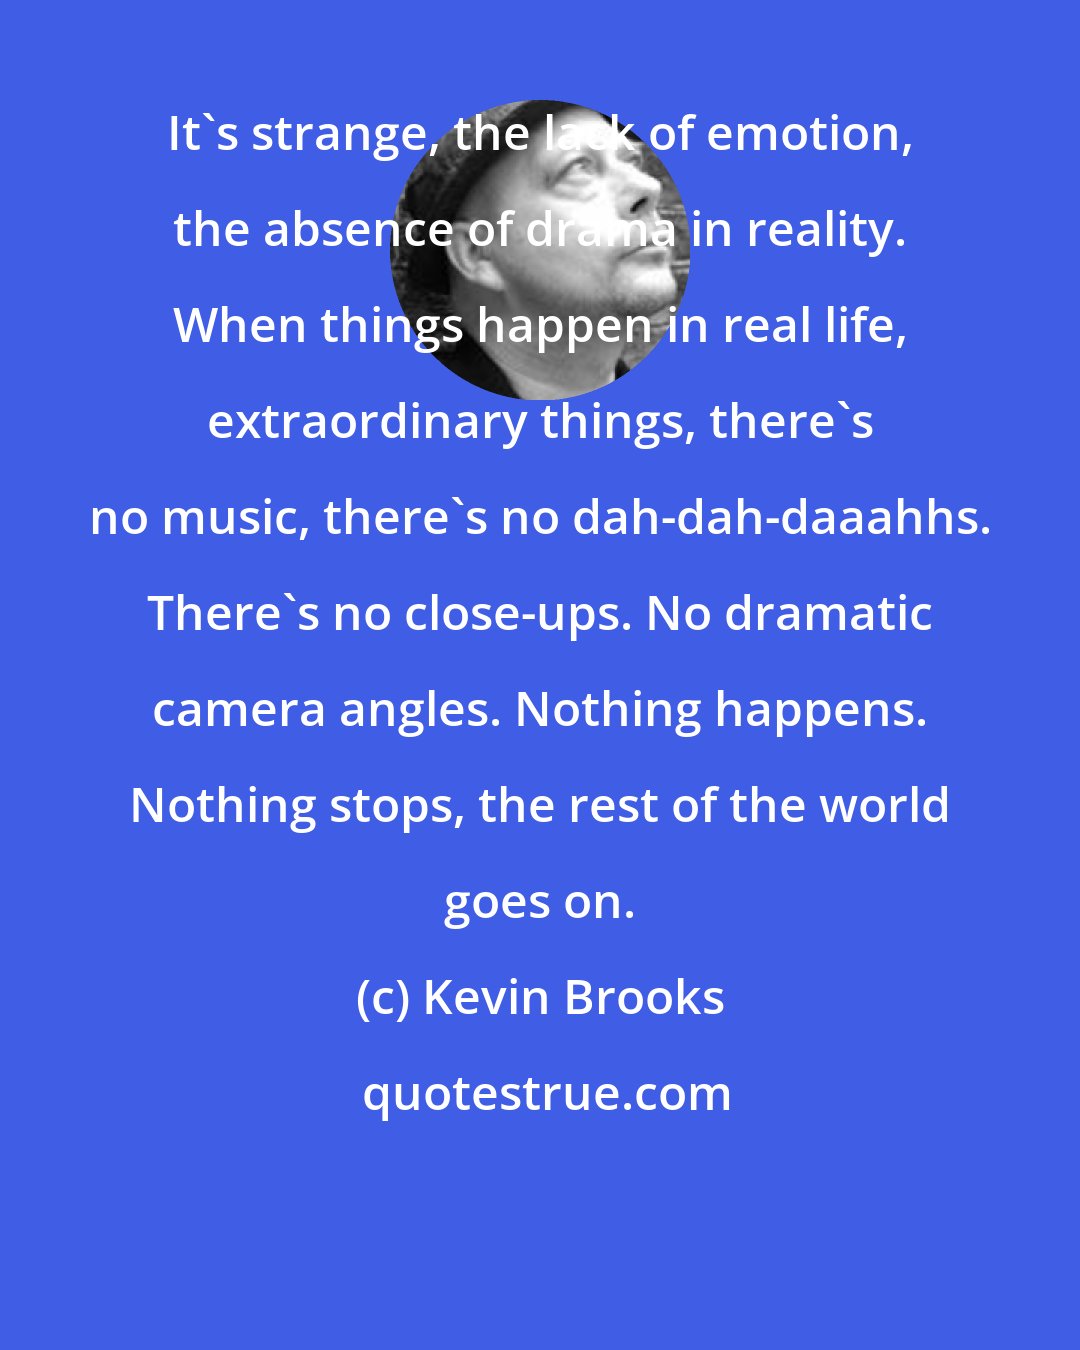 Kevin Brooks: It's strange, the lack of emotion, the absence of drama in reality. When things happen in real life, extraordinary things, there's no music, there's no dah-dah-daaahhs. There's no close-ups. No dramatic camera angles. Nothing happens. Nothing stops, the rest of the world goes on.